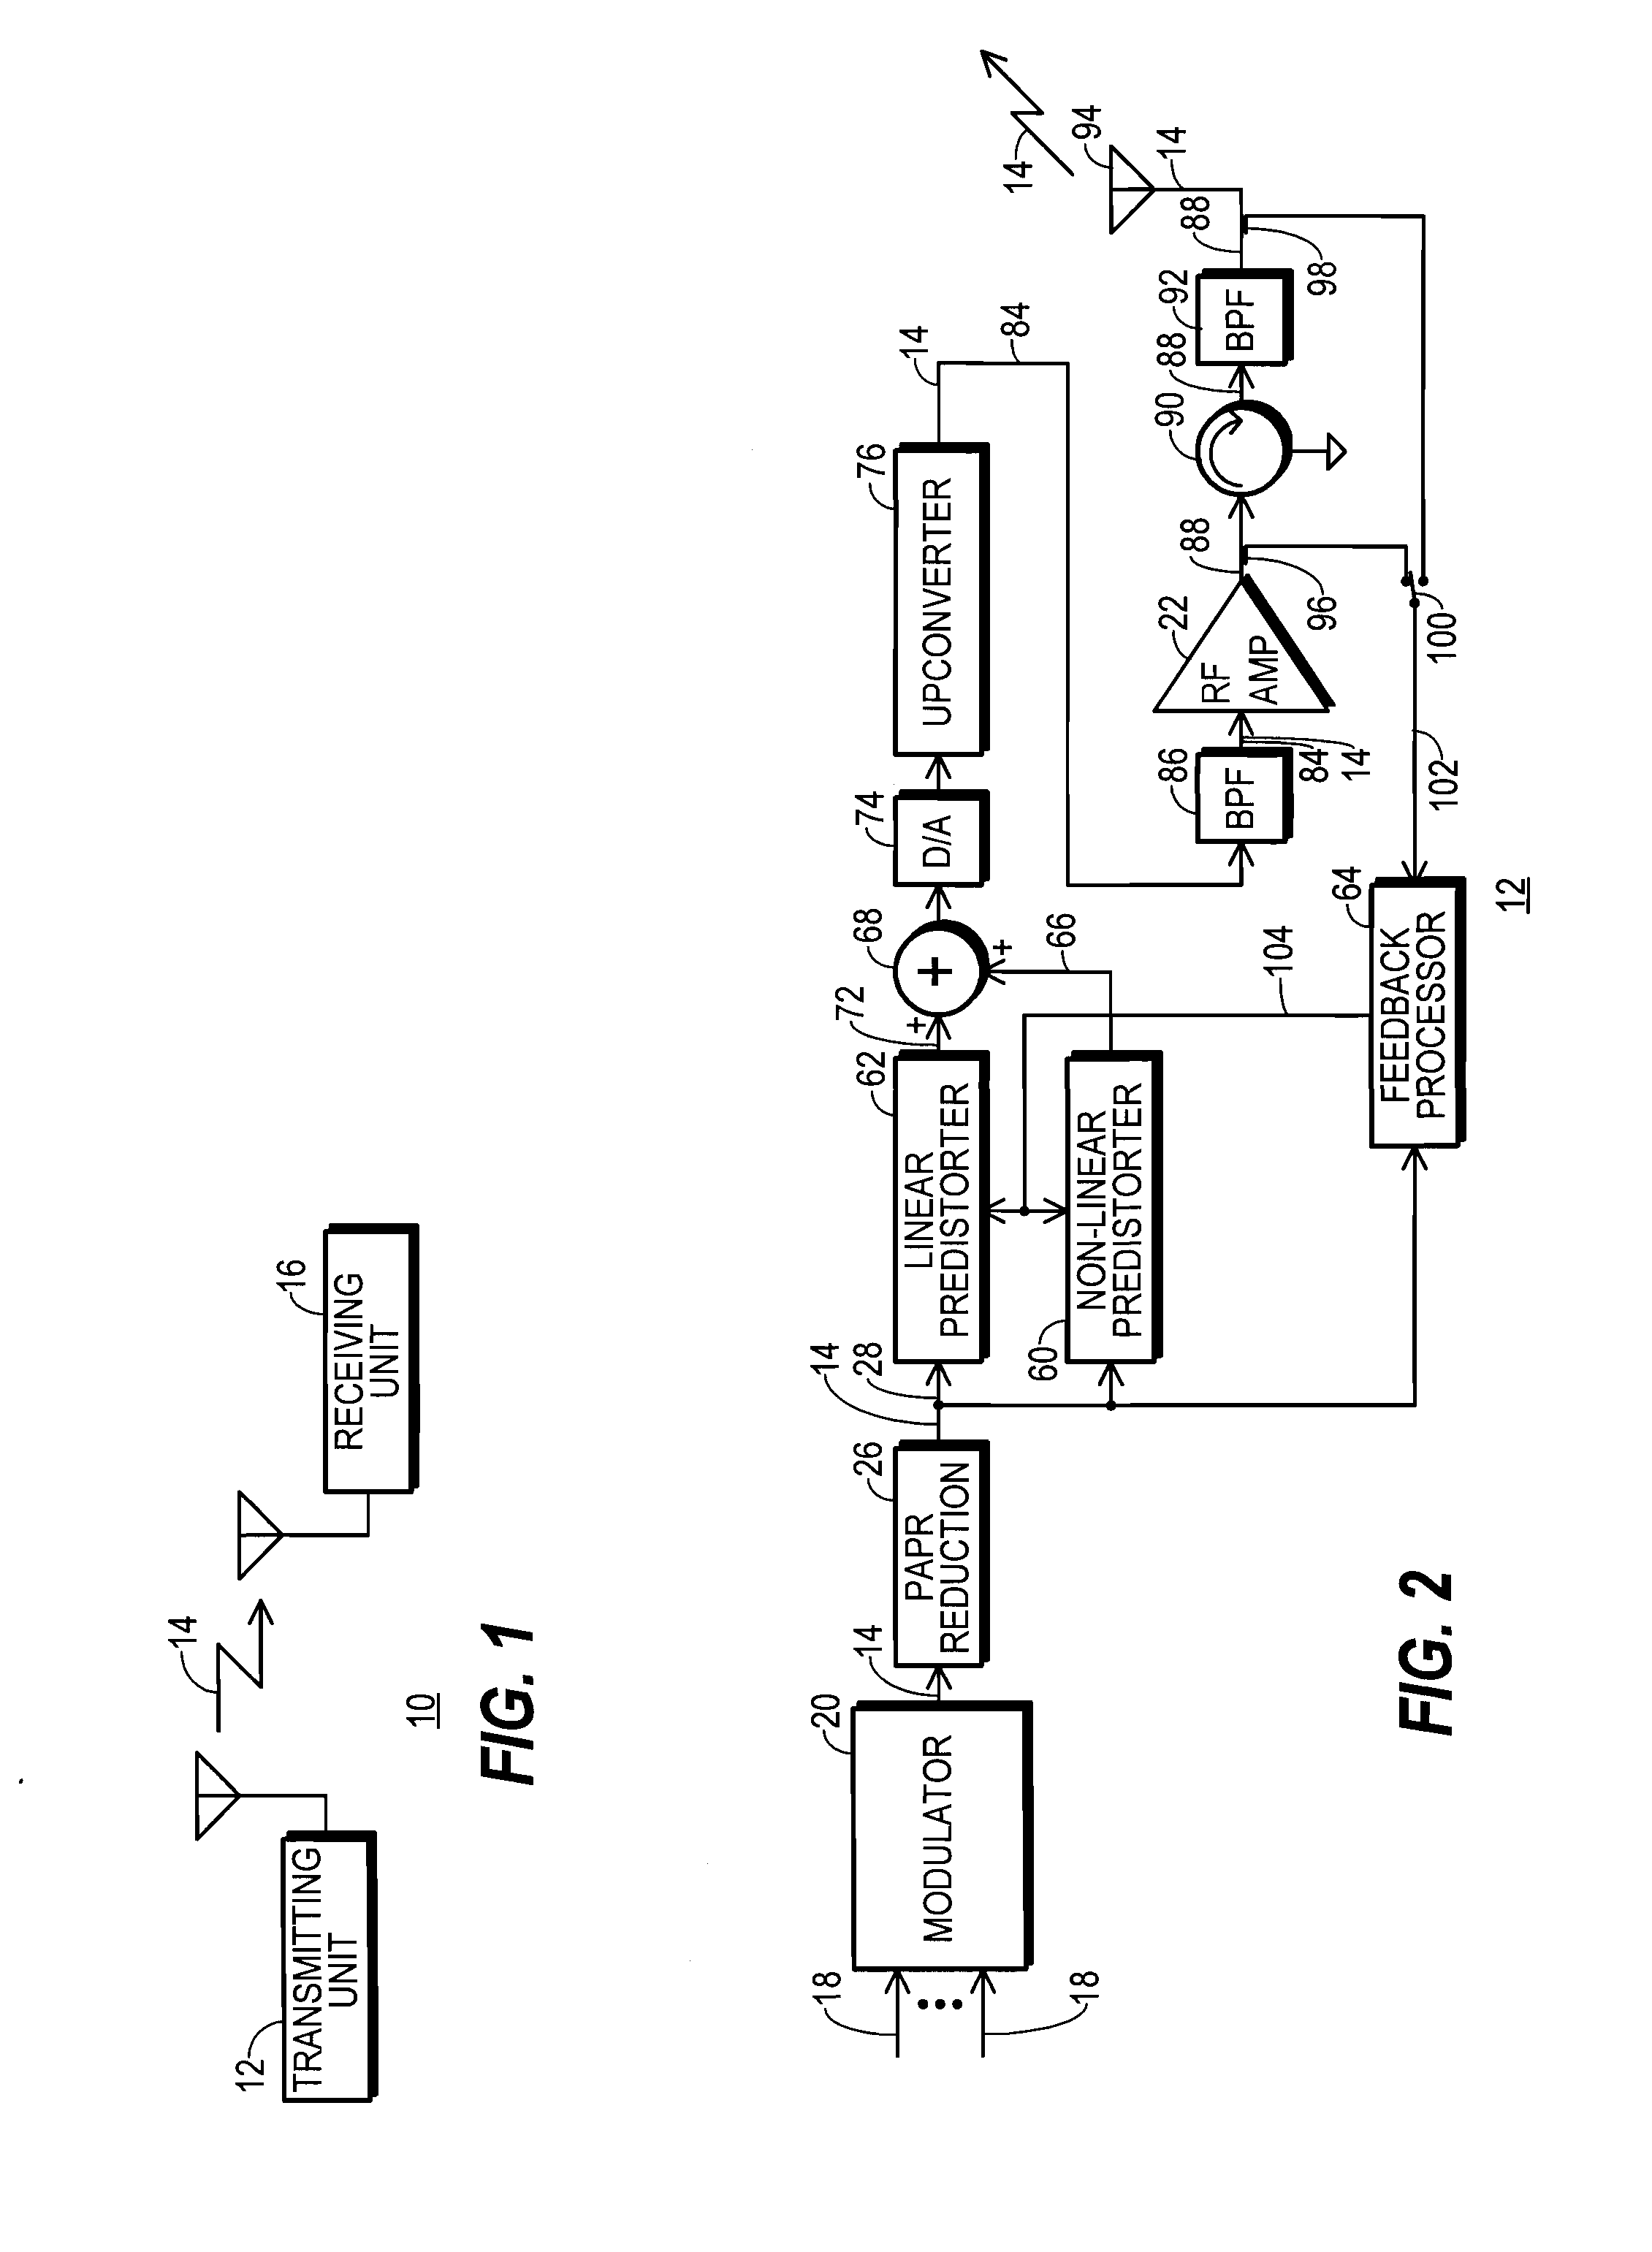 Transmitting unit that reduces papr using out-of-band distortion and method therefor